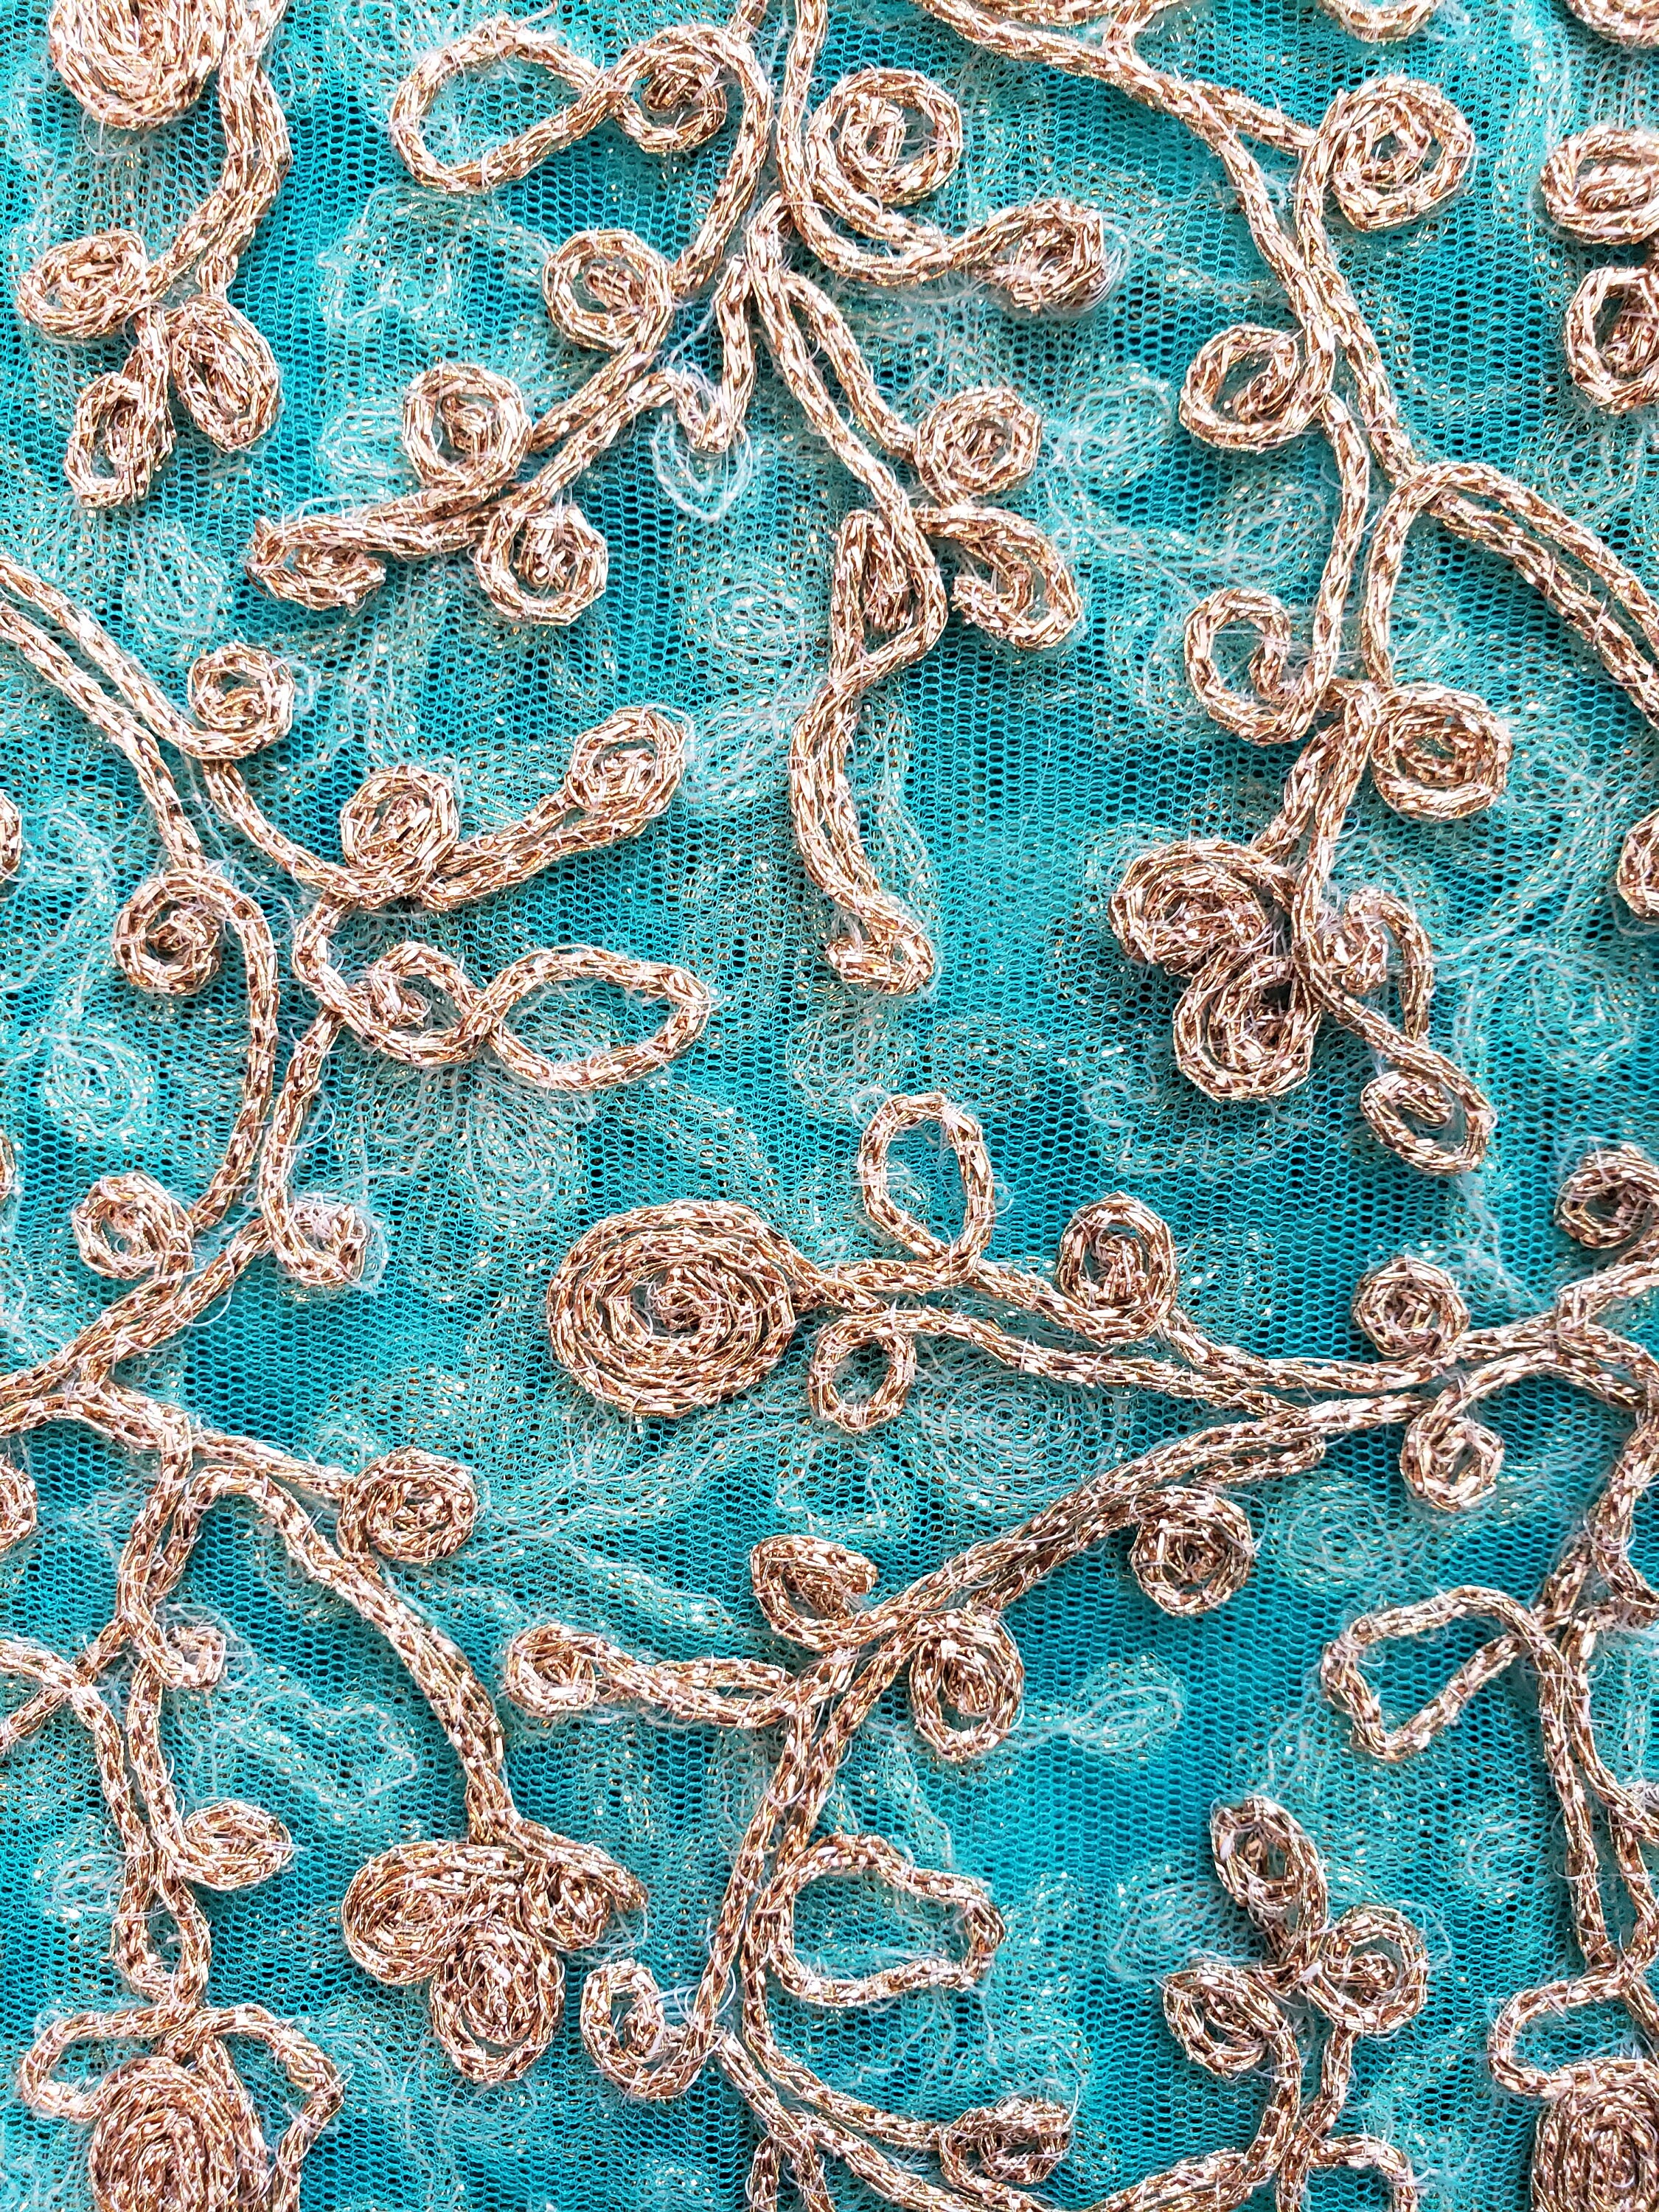 turquoise thread with the fabric in the wooden embroidery frame - a Royalty  Free Stock Photo from Photocase